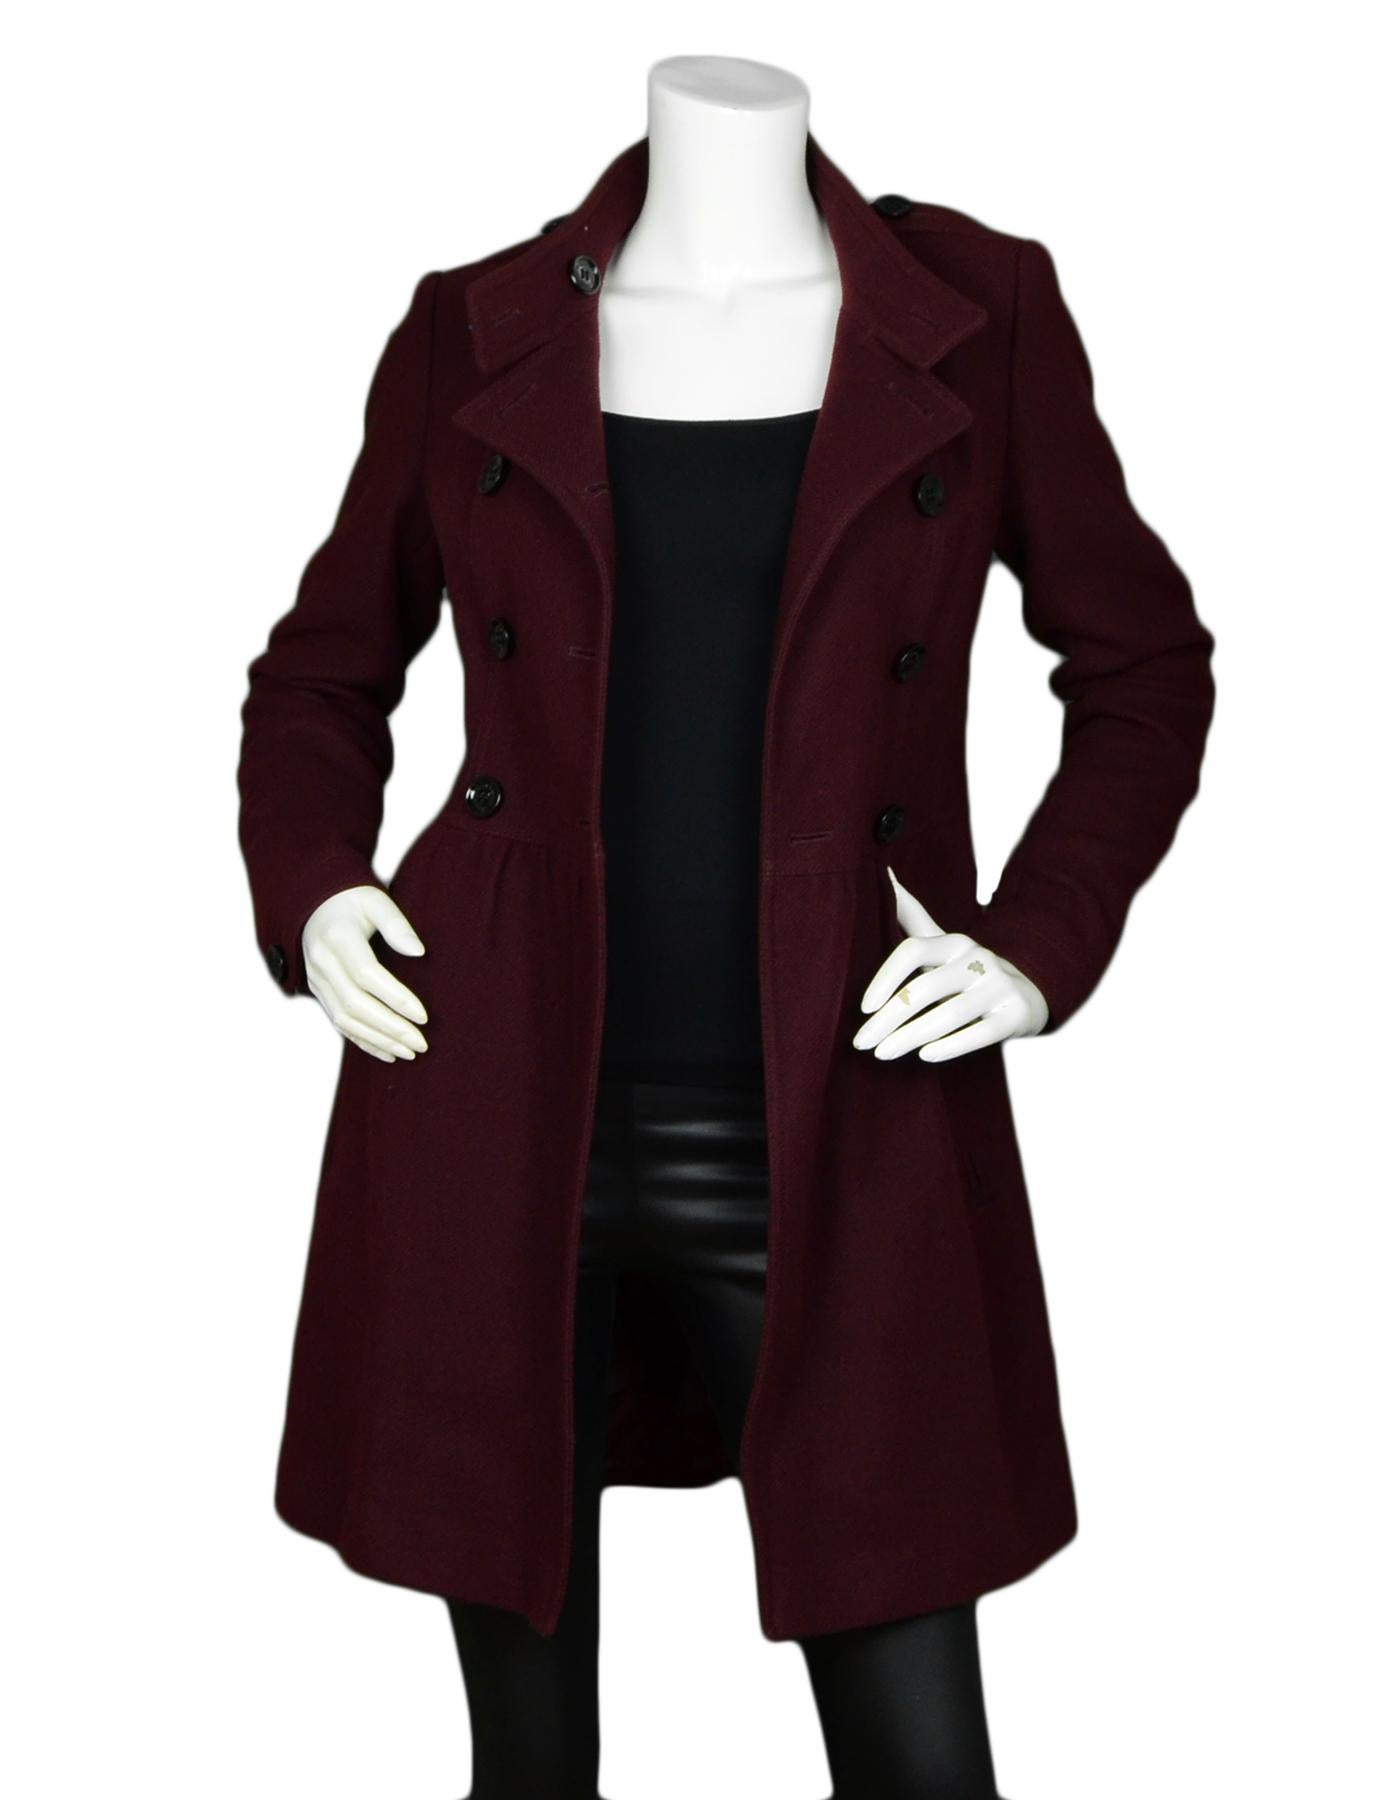 Burberry Brit Burgundy Wool Double Breasted Coat sz 4

Made In: Bosnia
Color: Burgundy
Materials: 70% Wool, 25% Polyamide, 5% Cashmere
Lining: 100% Viscose
Opening/Closure: Front Buttons
Overall Condition: Excellent pre-owned condition
Includes: